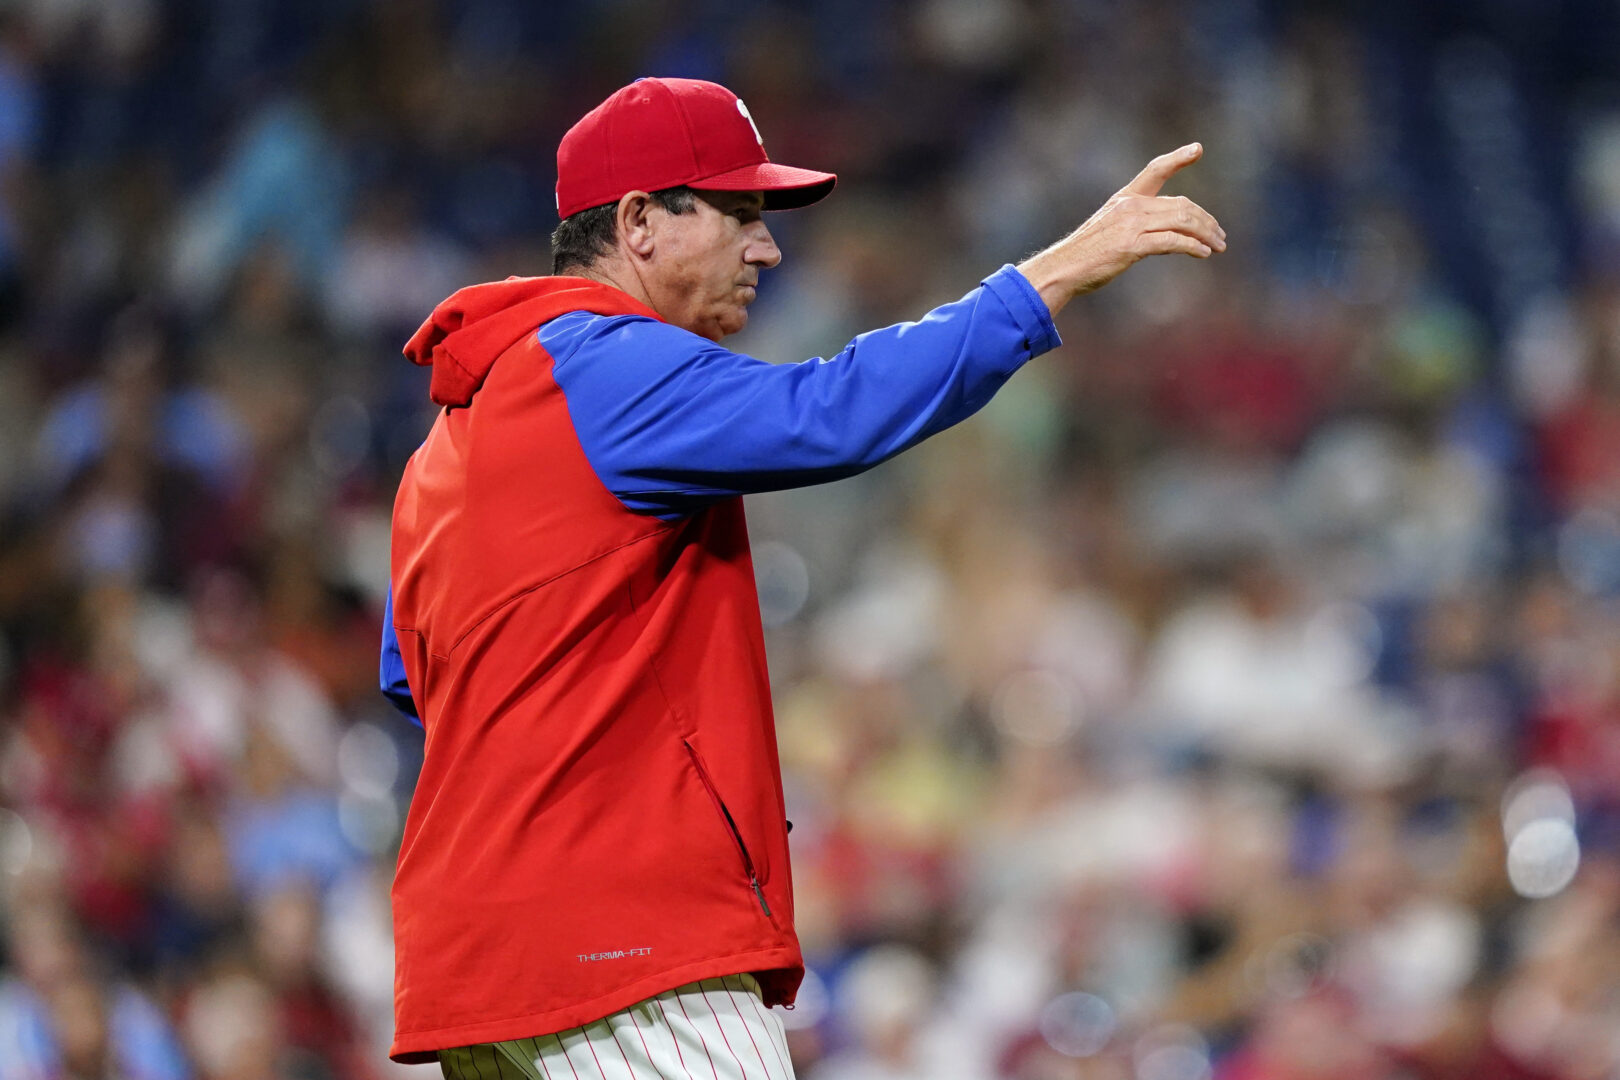 Philadelphia Phillies Sign Manager Rob Thomson to Two-Year Deal